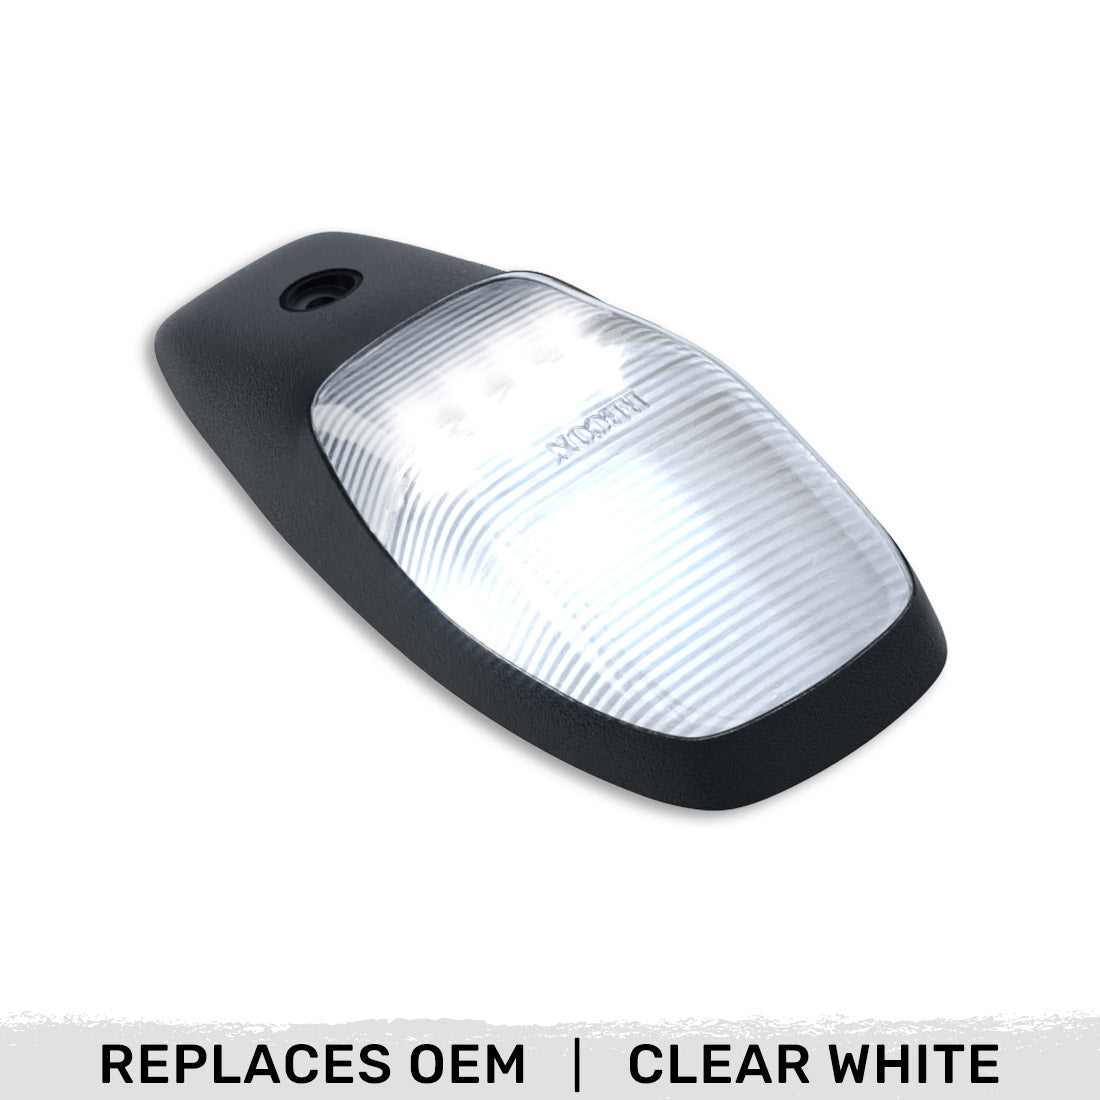  - REPLACING OEM / WHITE / CLEAR